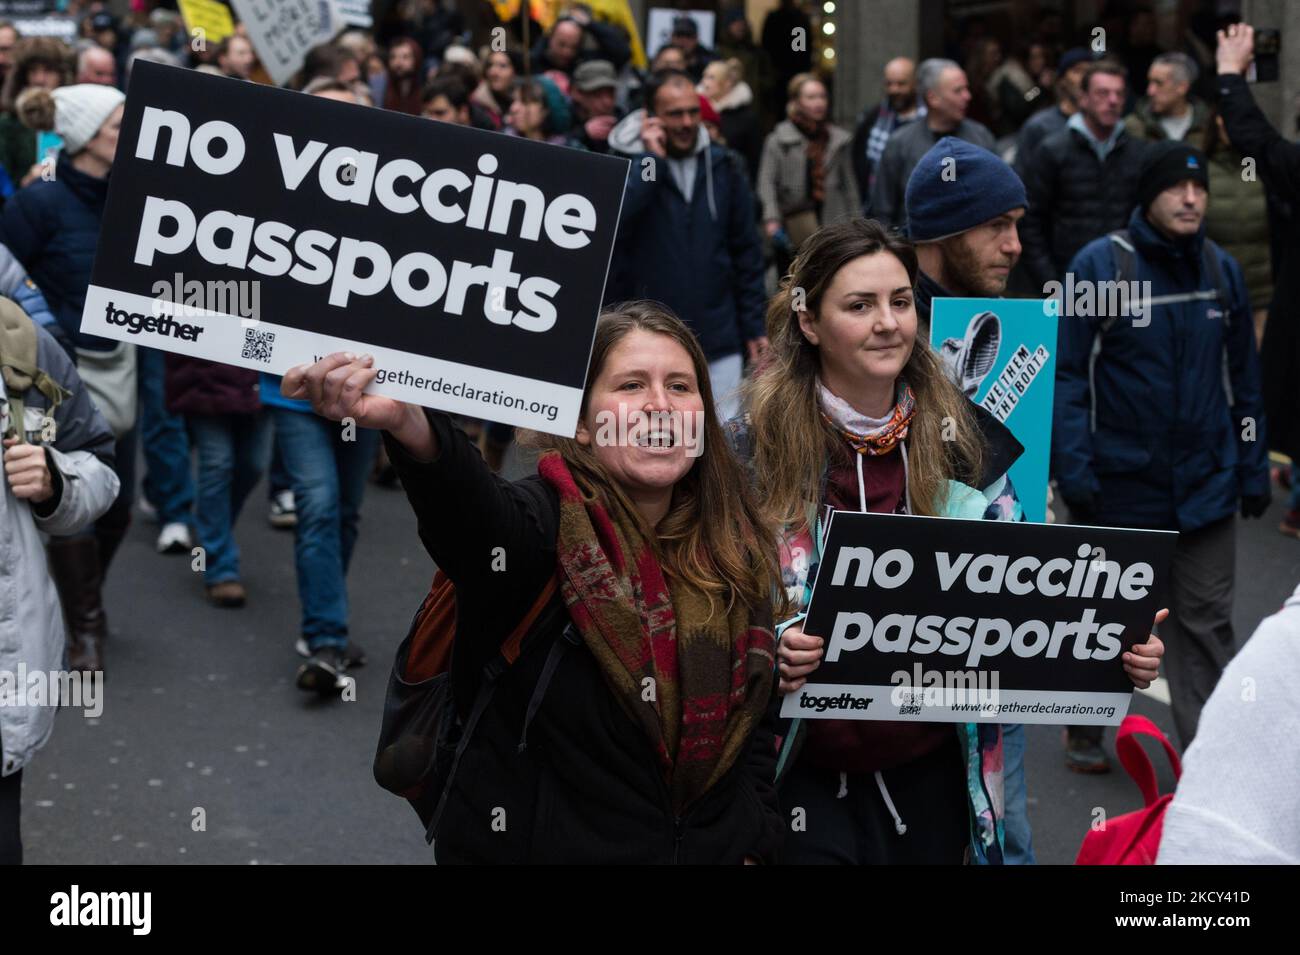 LONDON, UNITED KINGDOM - DECEMBER 18, 2021: Demonstrators march through central London during a protest against Covid-19 vaccines, vaccine passports and mandates after this week's Commons vote in favour of vaccine certificates for some larger venues as well as mandatory vaccinations for NHS and social care workers in England on December 18, 2021 in London, England. The measures approved by MPs are part of the government's winter Plan B introduced in response to the emergence of the new coronavirus variant - Omicron - and a rapid rise in cases in the run up to Christmas. (Photo by WIktor Szyman Stock Photo